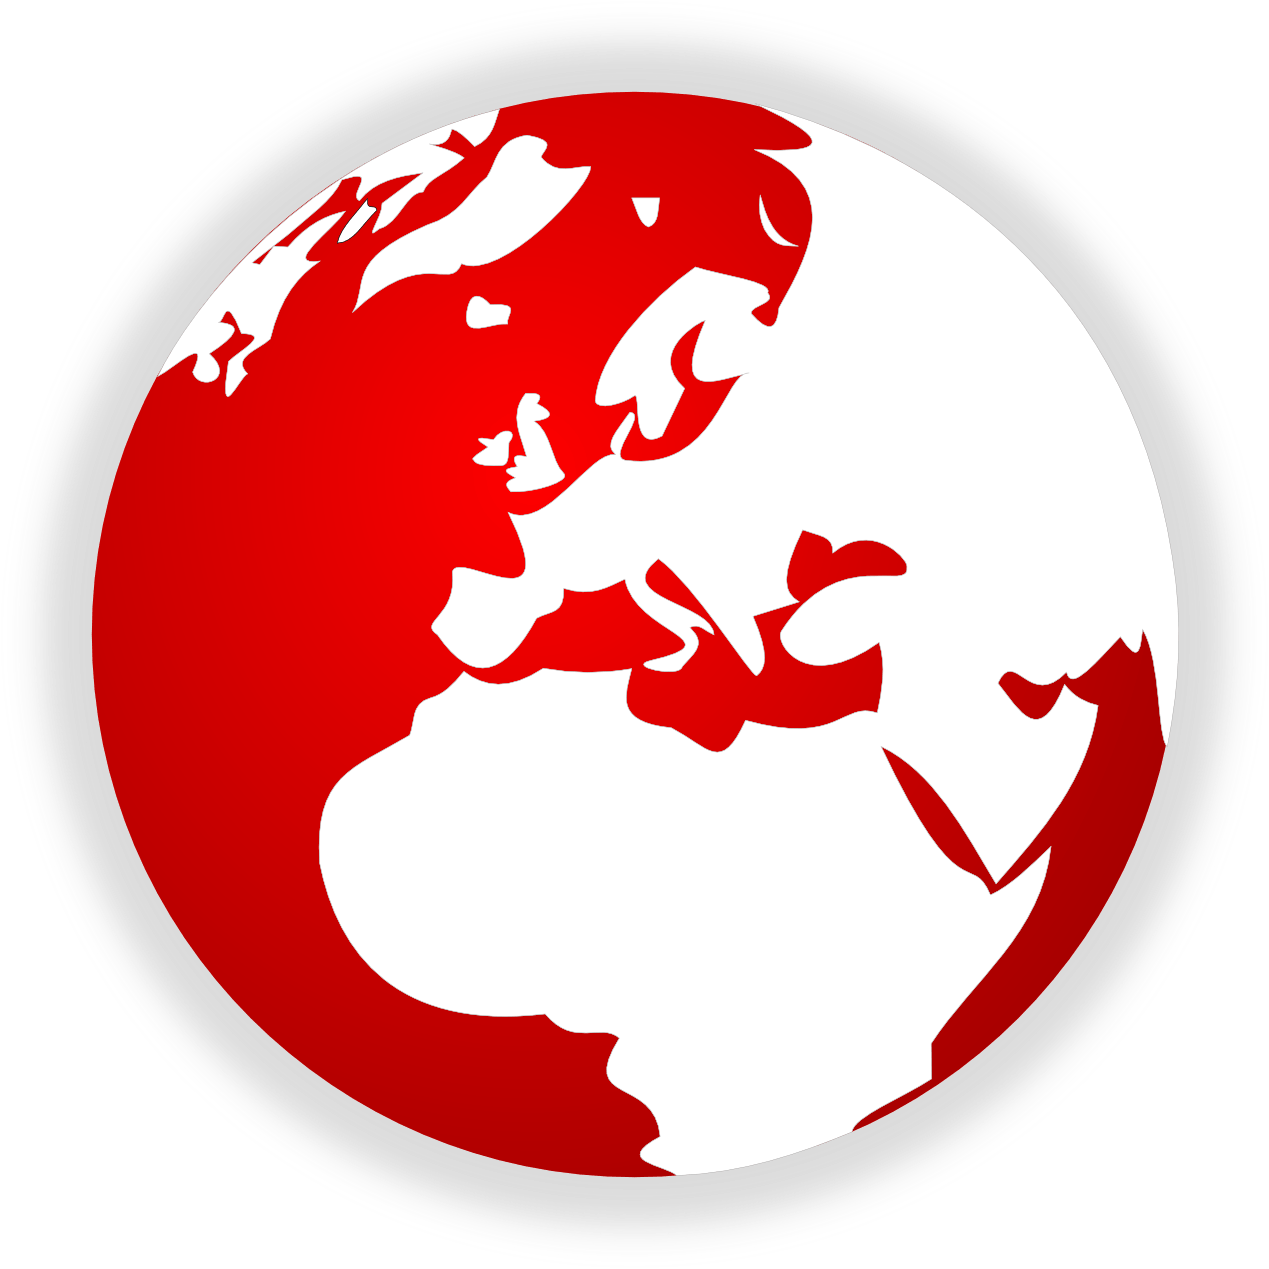 Red World Globe Logo - Red World | Free Images at Clker.com - vector clip art online ...